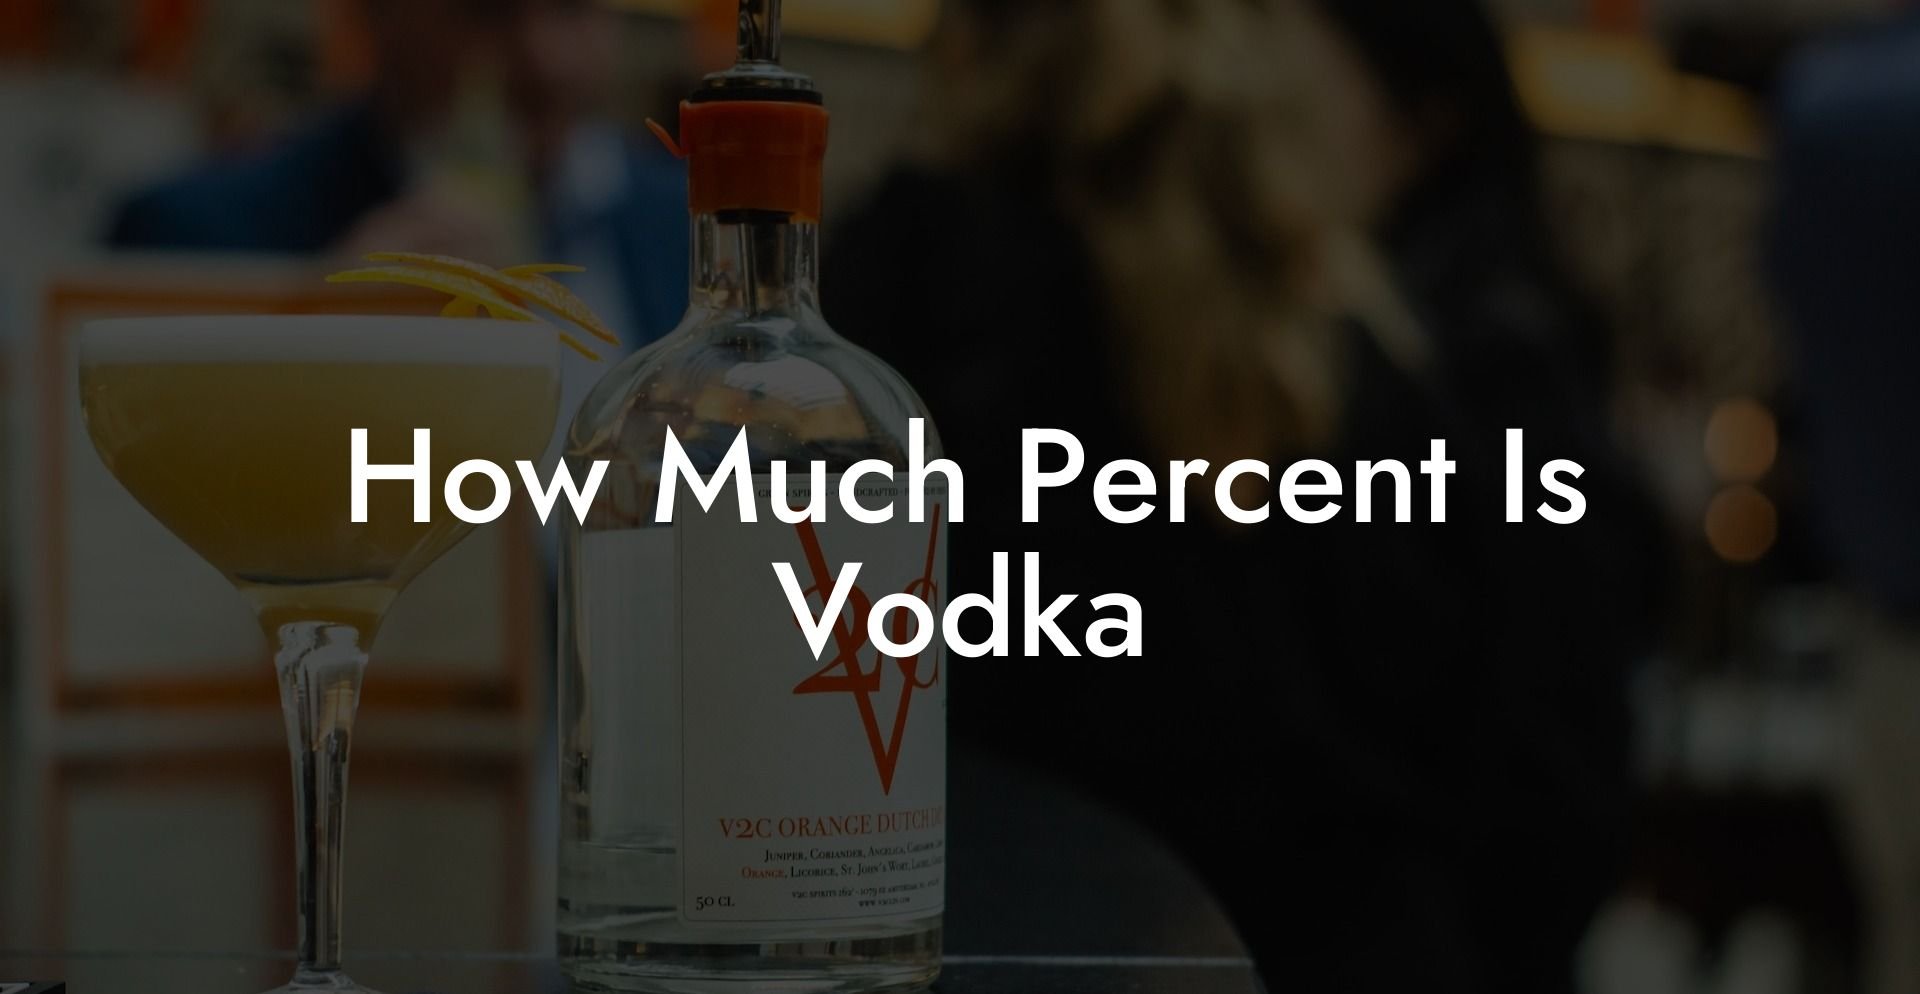 How Much Percent Is Vodka